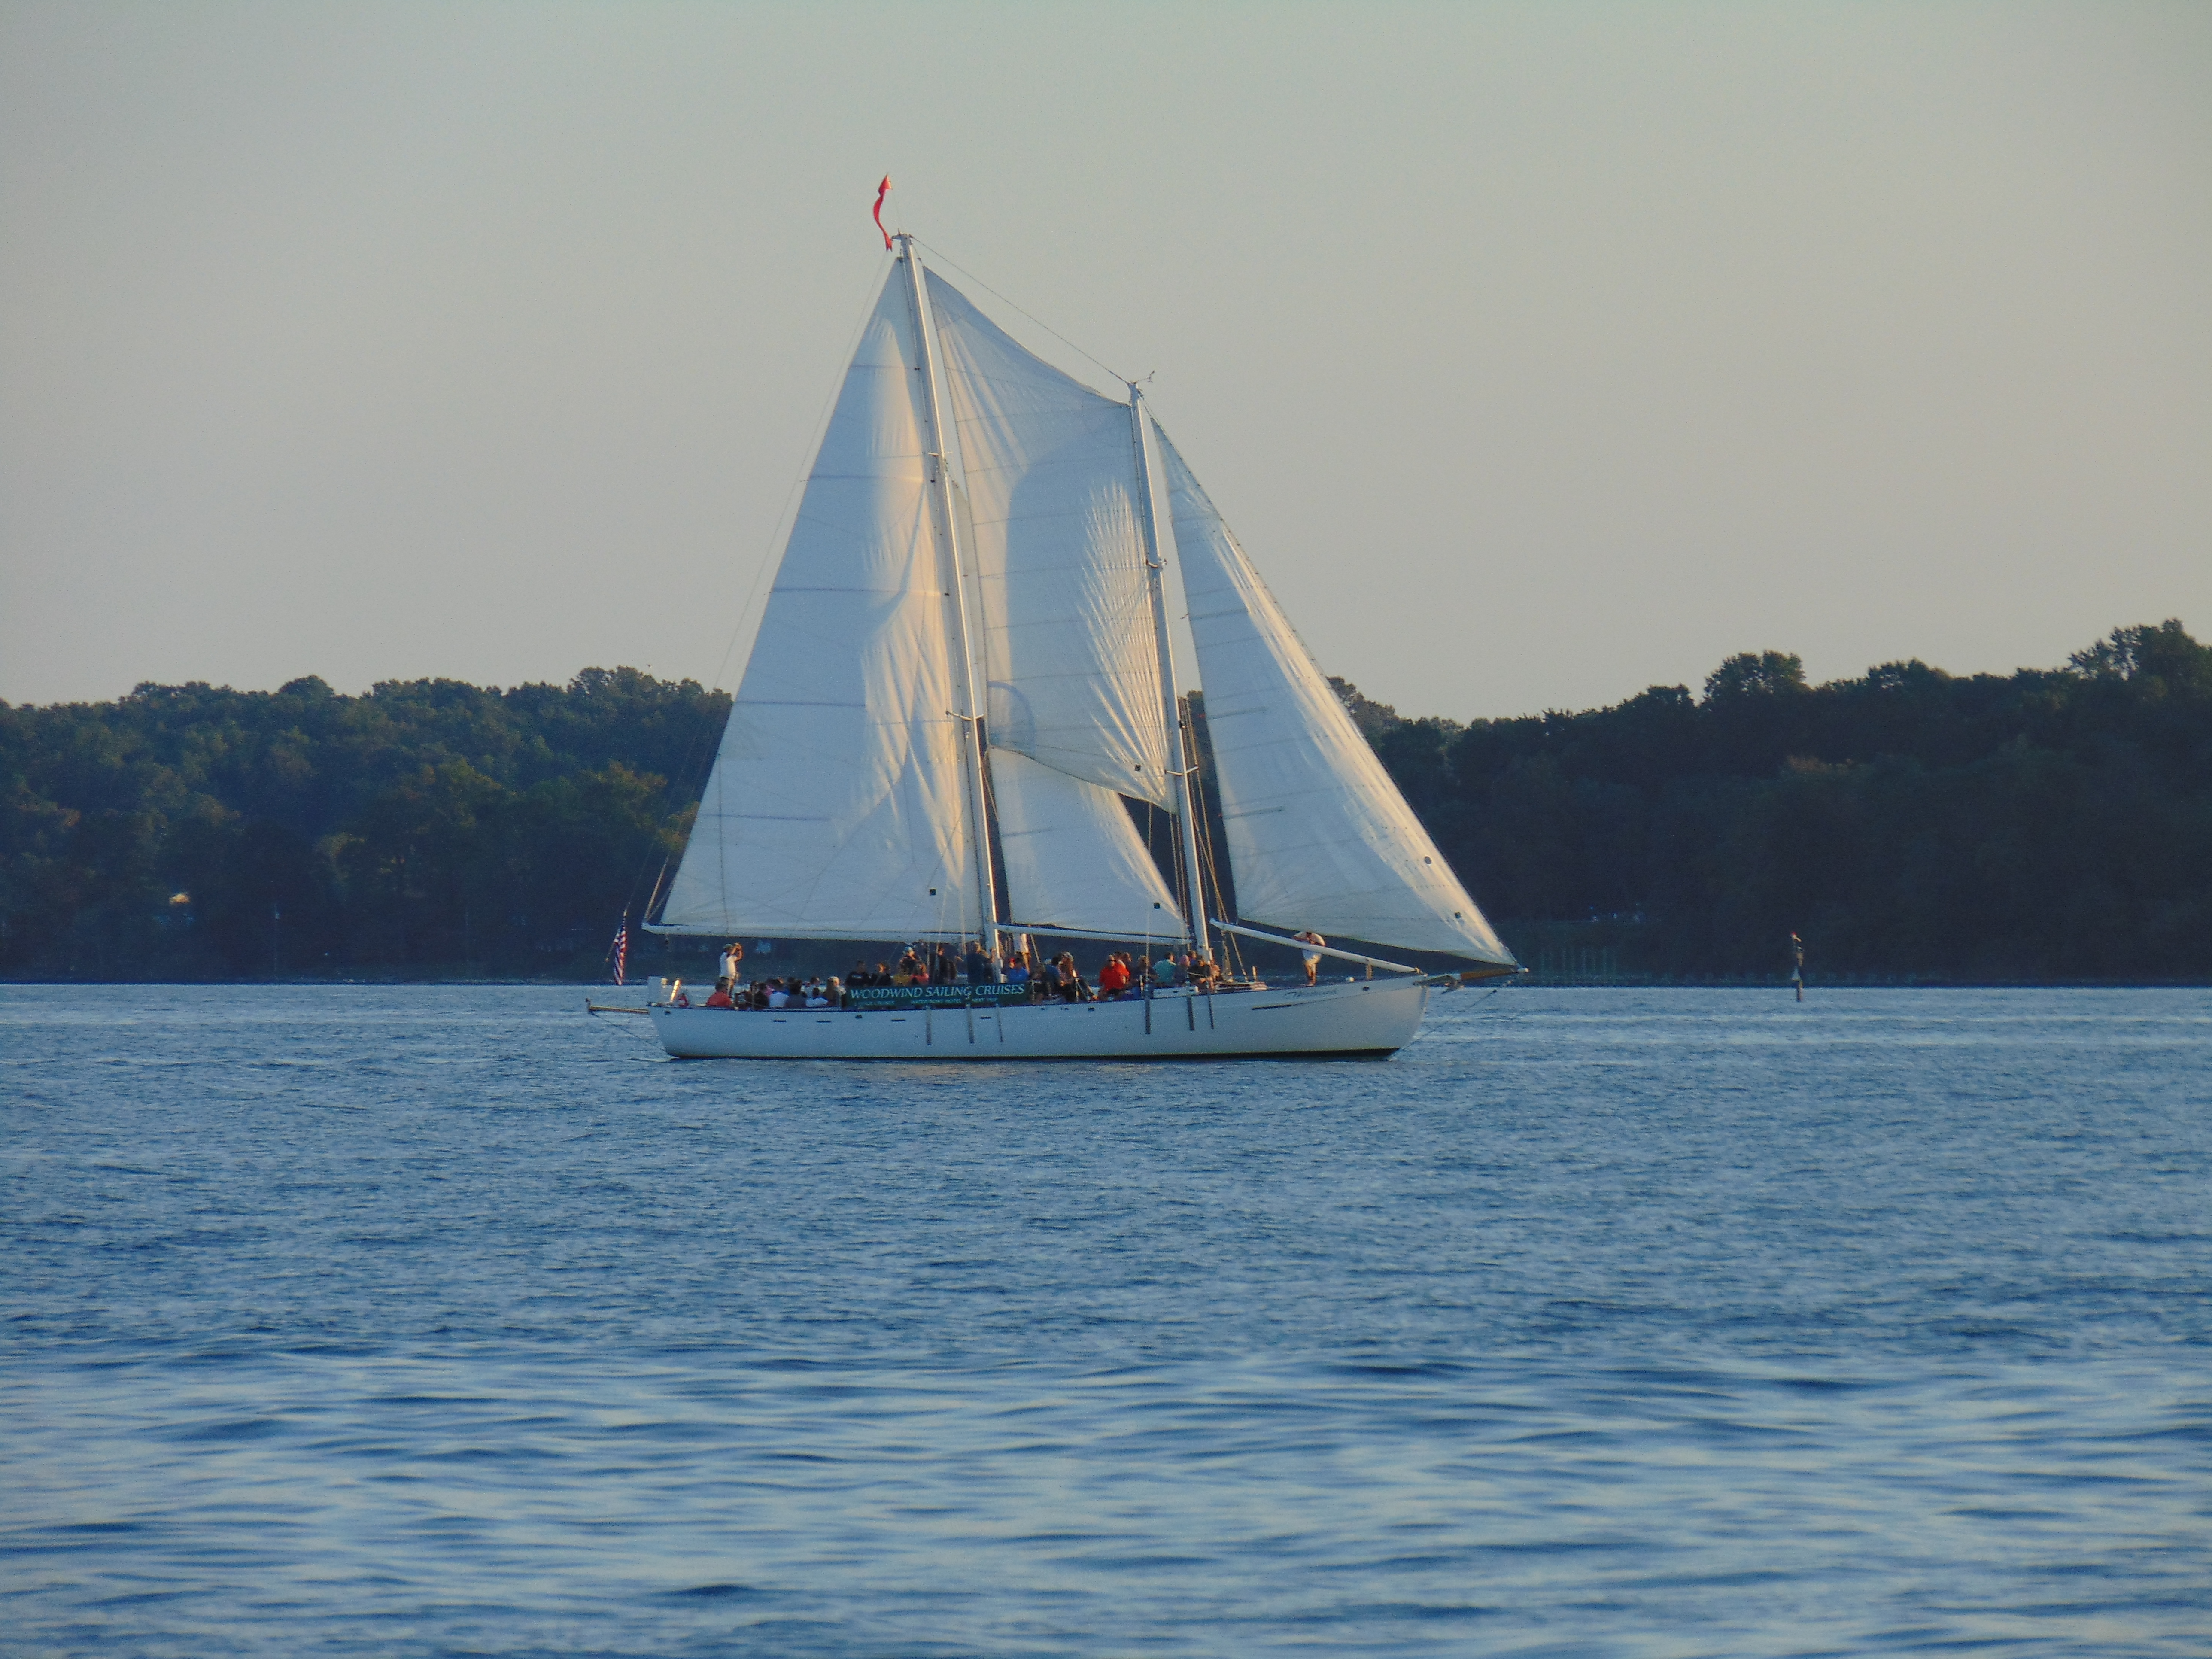 Schooner on a sunset cruise with calm blue waters on an October day